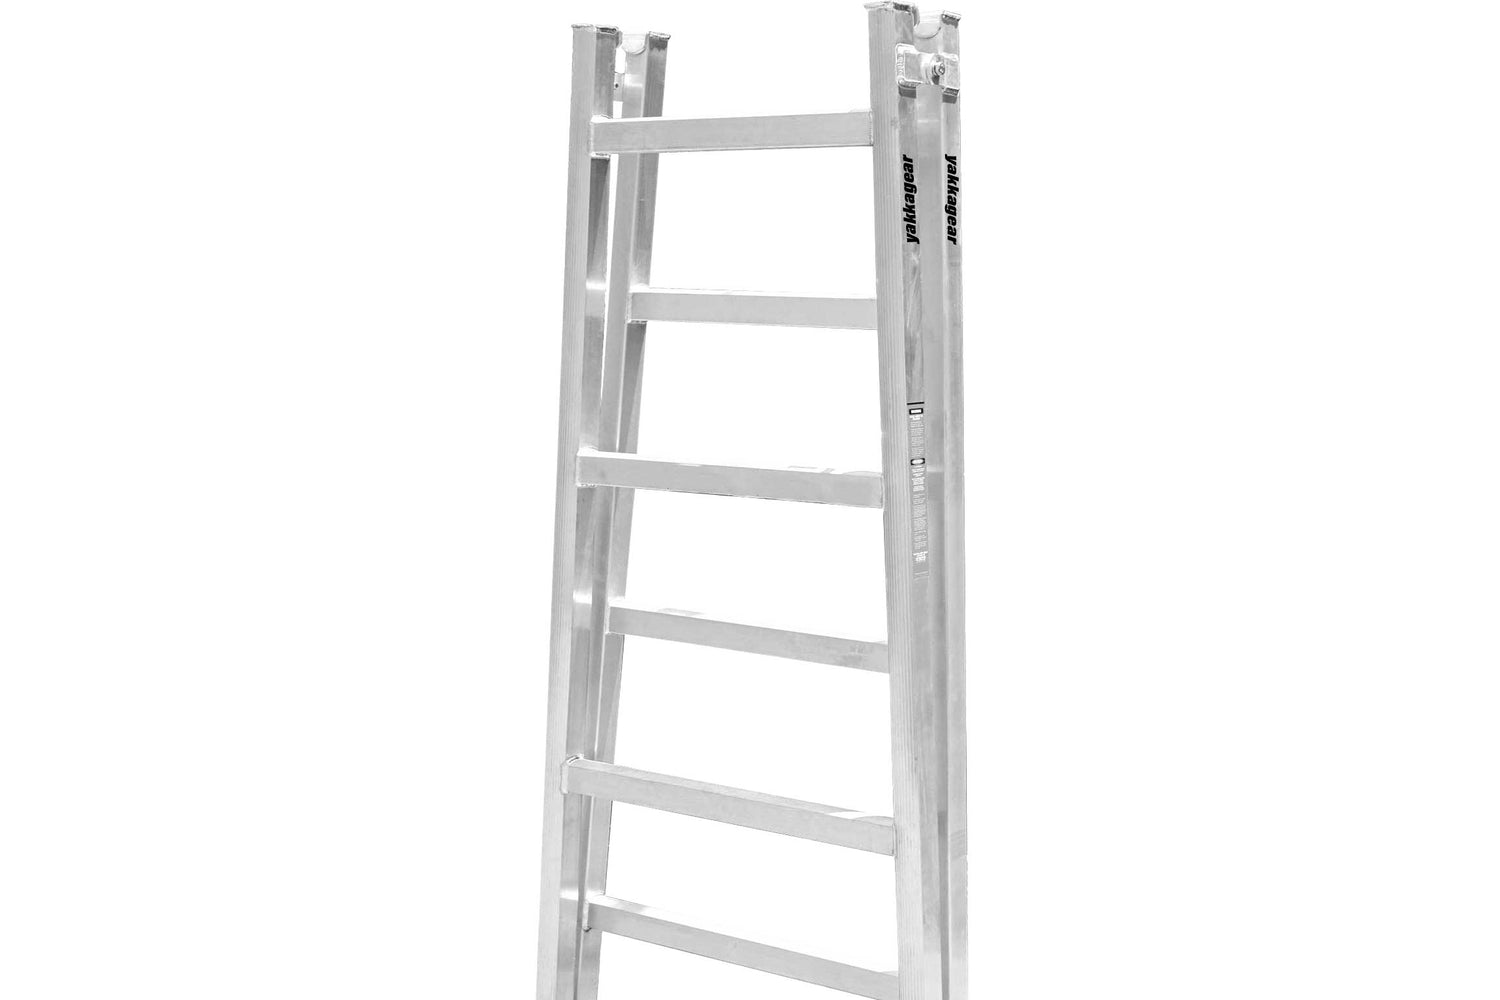 Yakka Gear Australia Aluminium Trestles as access equipment. Various sized trestles available including 1.8m, 2.4m, 3.0m, 3.6m, 4.2m. All the trestles are adjustable by 260mm with Adjustable legs. View of the whole trestle ladder folded & seen from the side on a white background. 